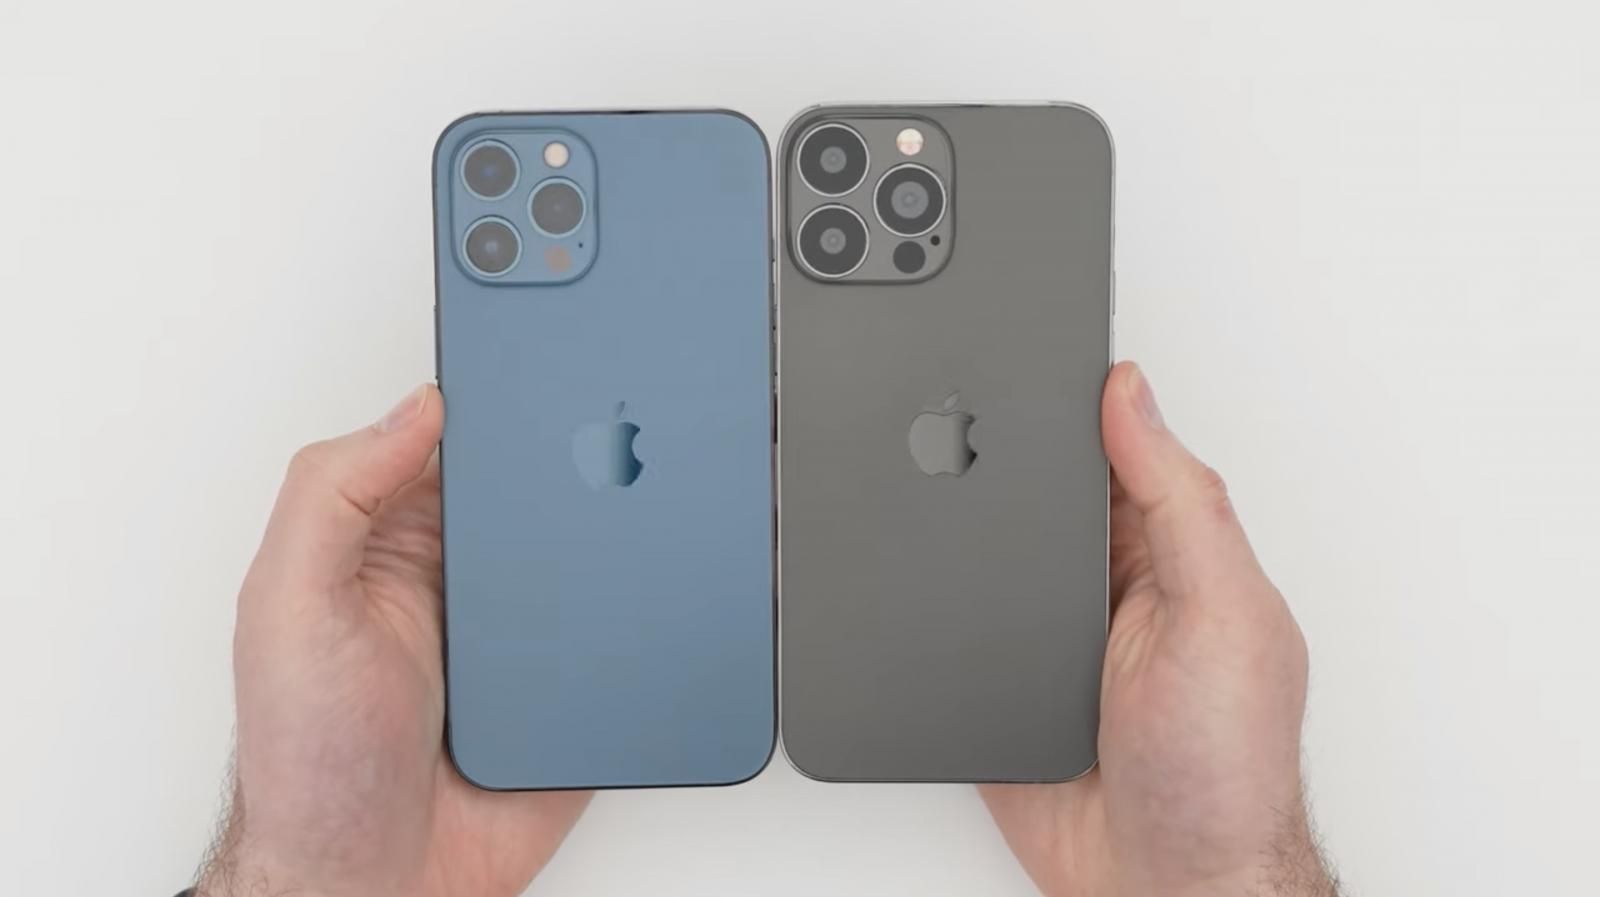 iPhone 13 dummy unit compared to iPhone 12